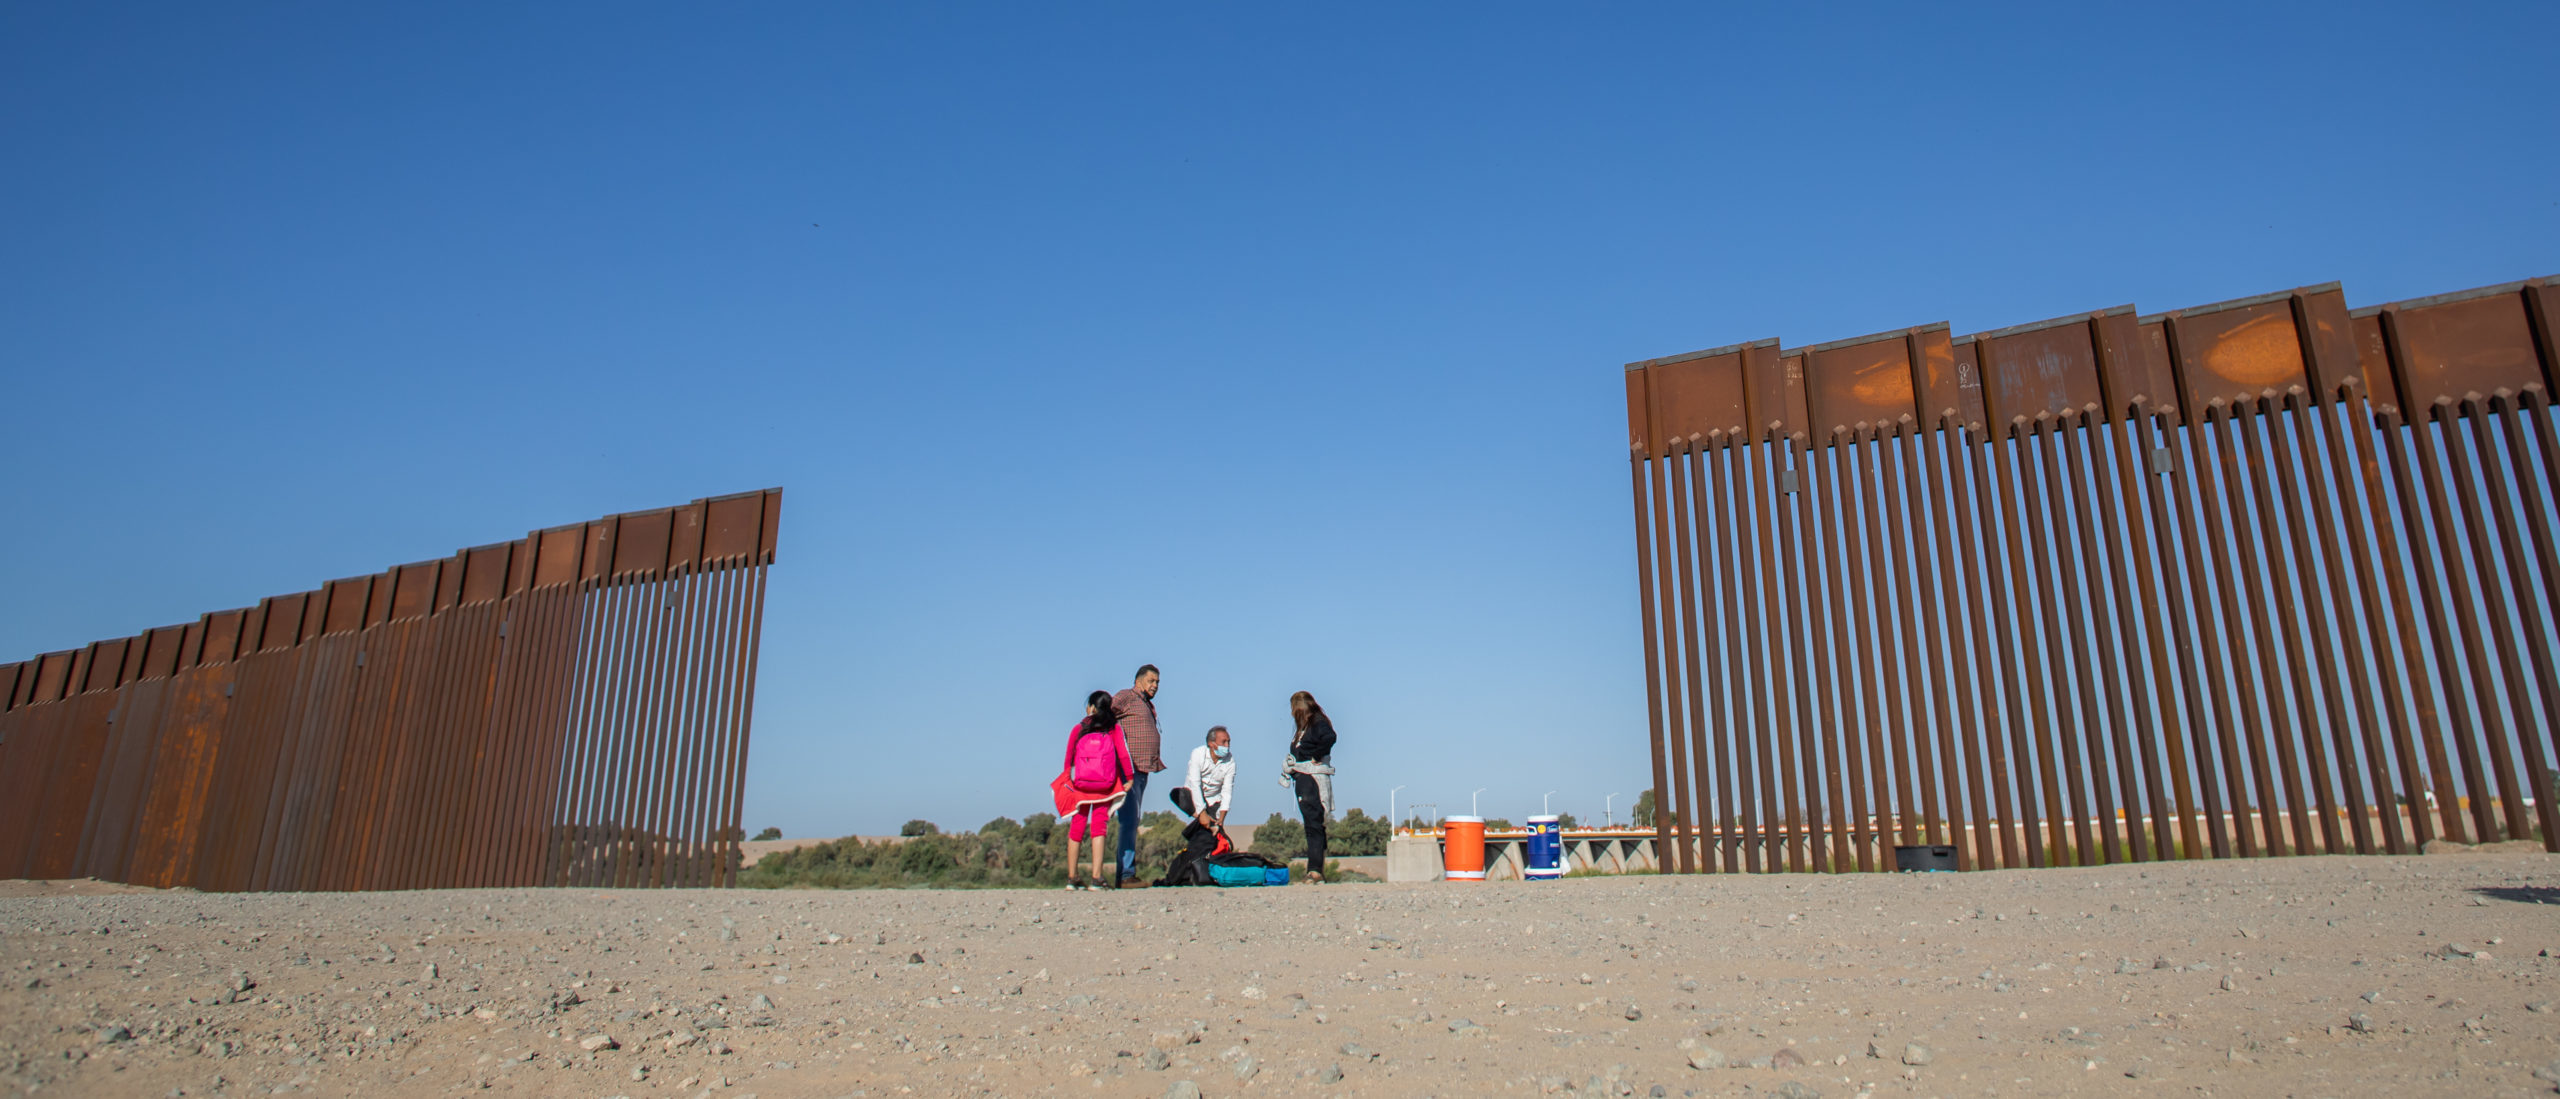 YUMA, AZ - MAY 13: A family of asylum seekers from Colombia walk through an opening in the wall at the US Mexico border to turn themselves in to US Border Patrol agents on May 13, 2021 in Yuma, Arizona. The Biden administration is trying to develop a plan to safely handle the surge of immigrants coming across the Southern border. (Photo by Apu Gomes/Getty Images)